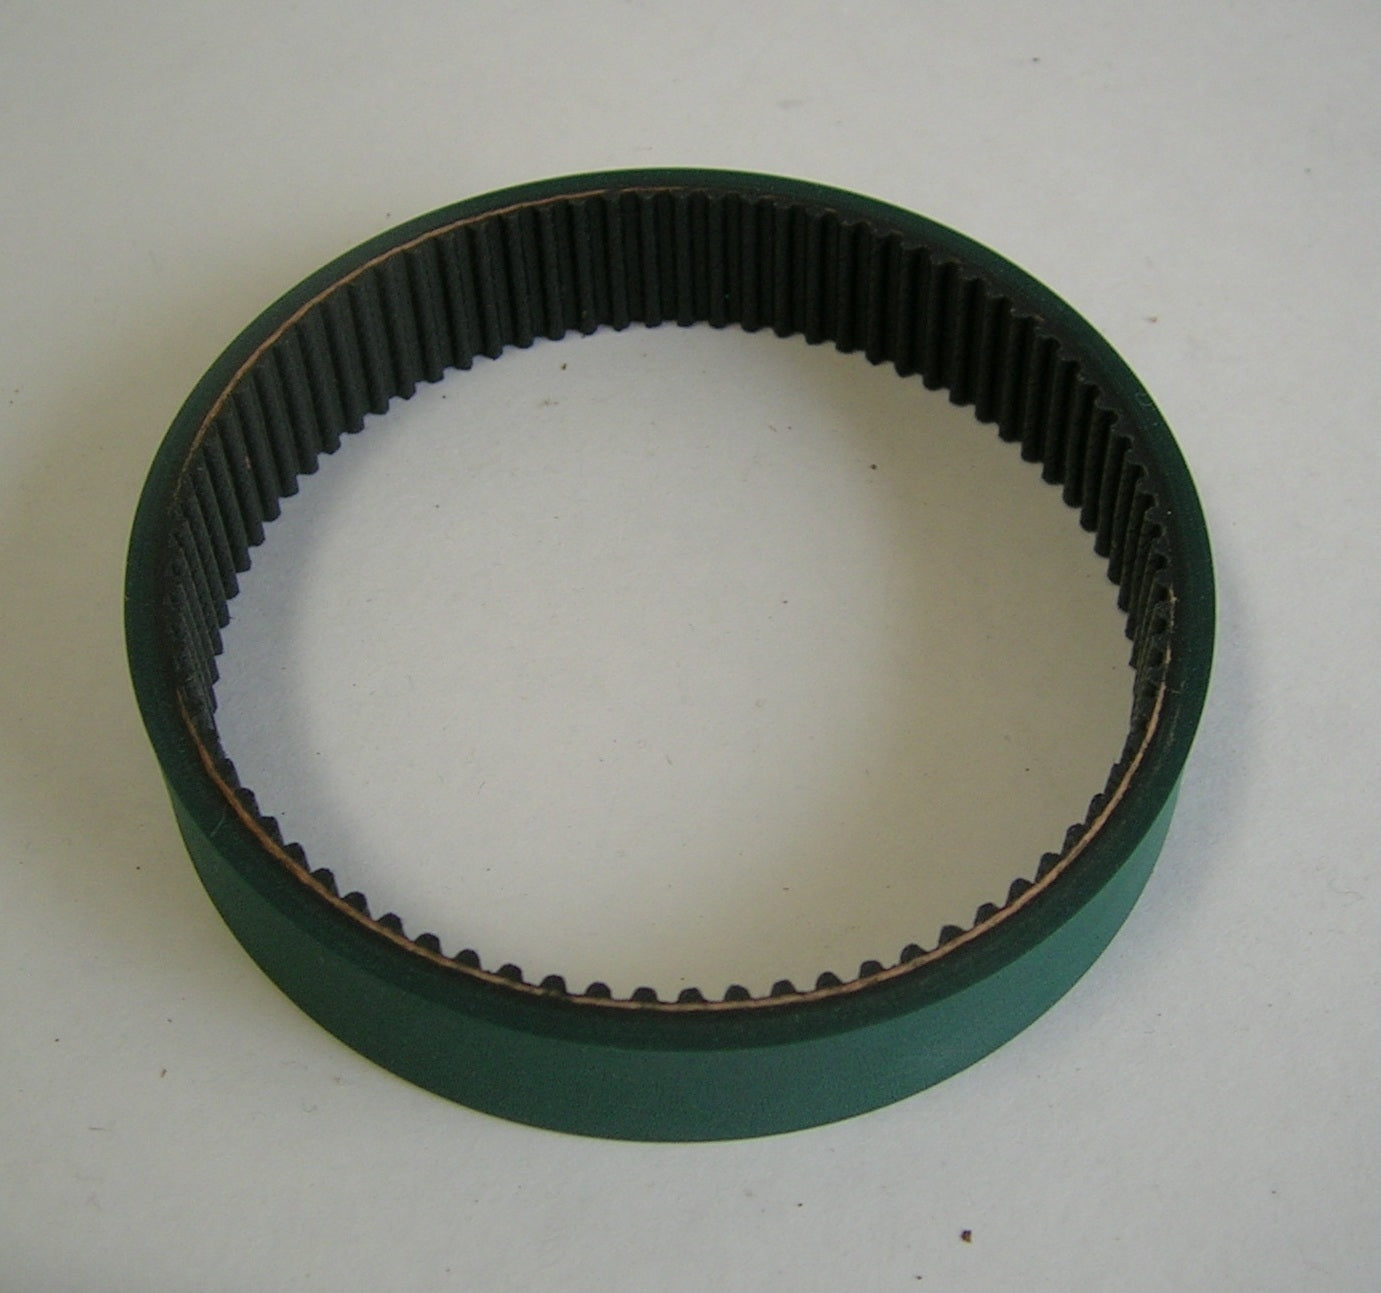 ES 9380 Toothed Replacement Grabber Feed Belt for Schleuniger ES9380 Green